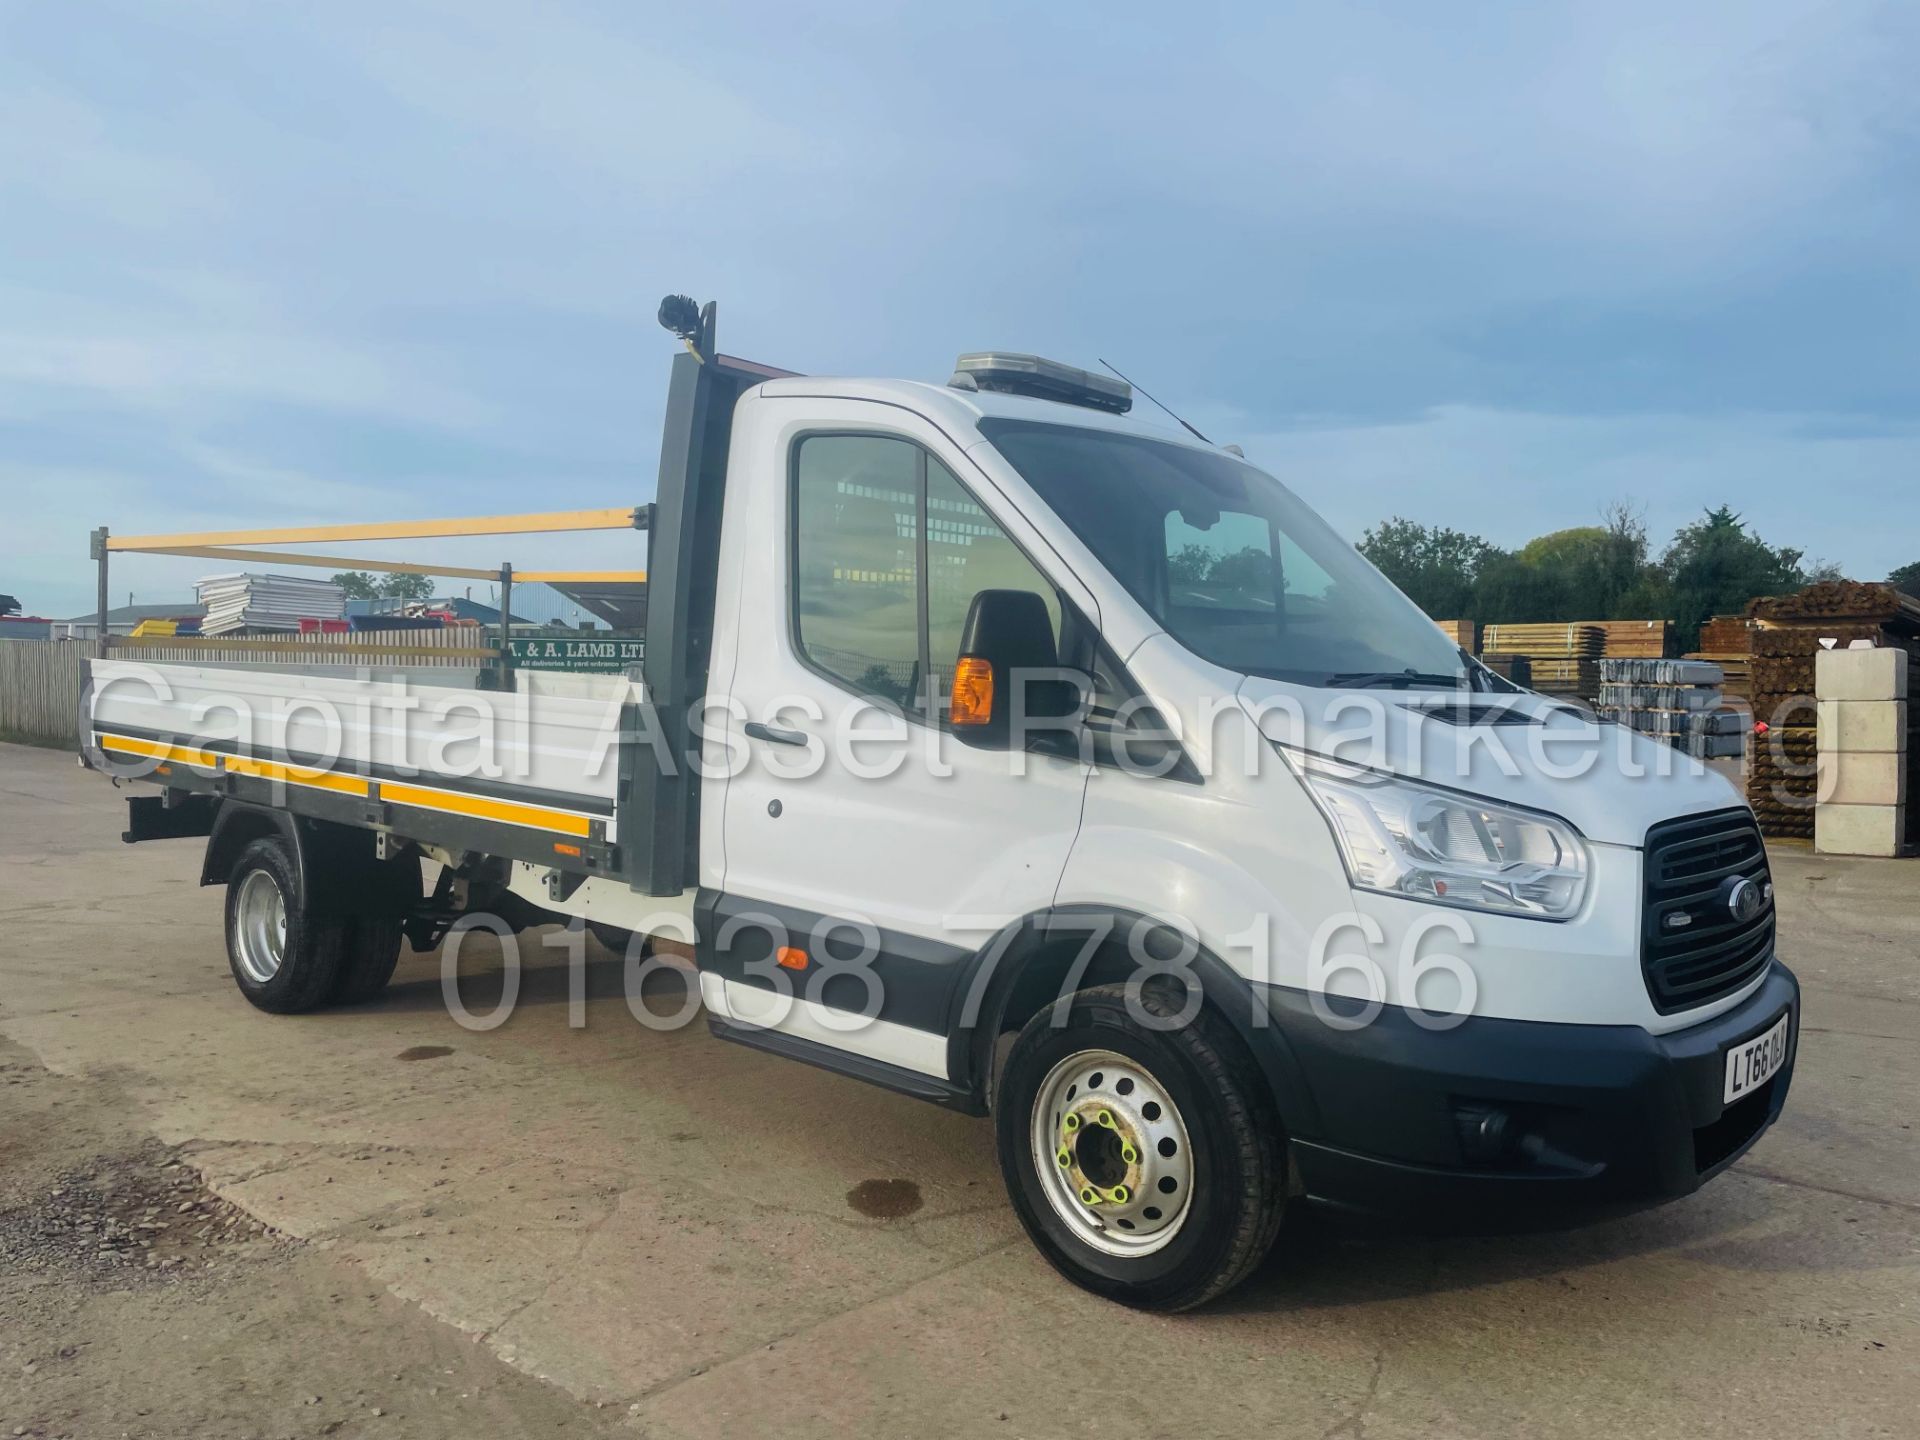 (On Sale) FORD TRANSIT 125 T350 *L4 - XLWB DROPSIDE TRUCK* (2017 - EURO 6) '2.2 TDCI - 6 SPEED' - Image 2 of 40